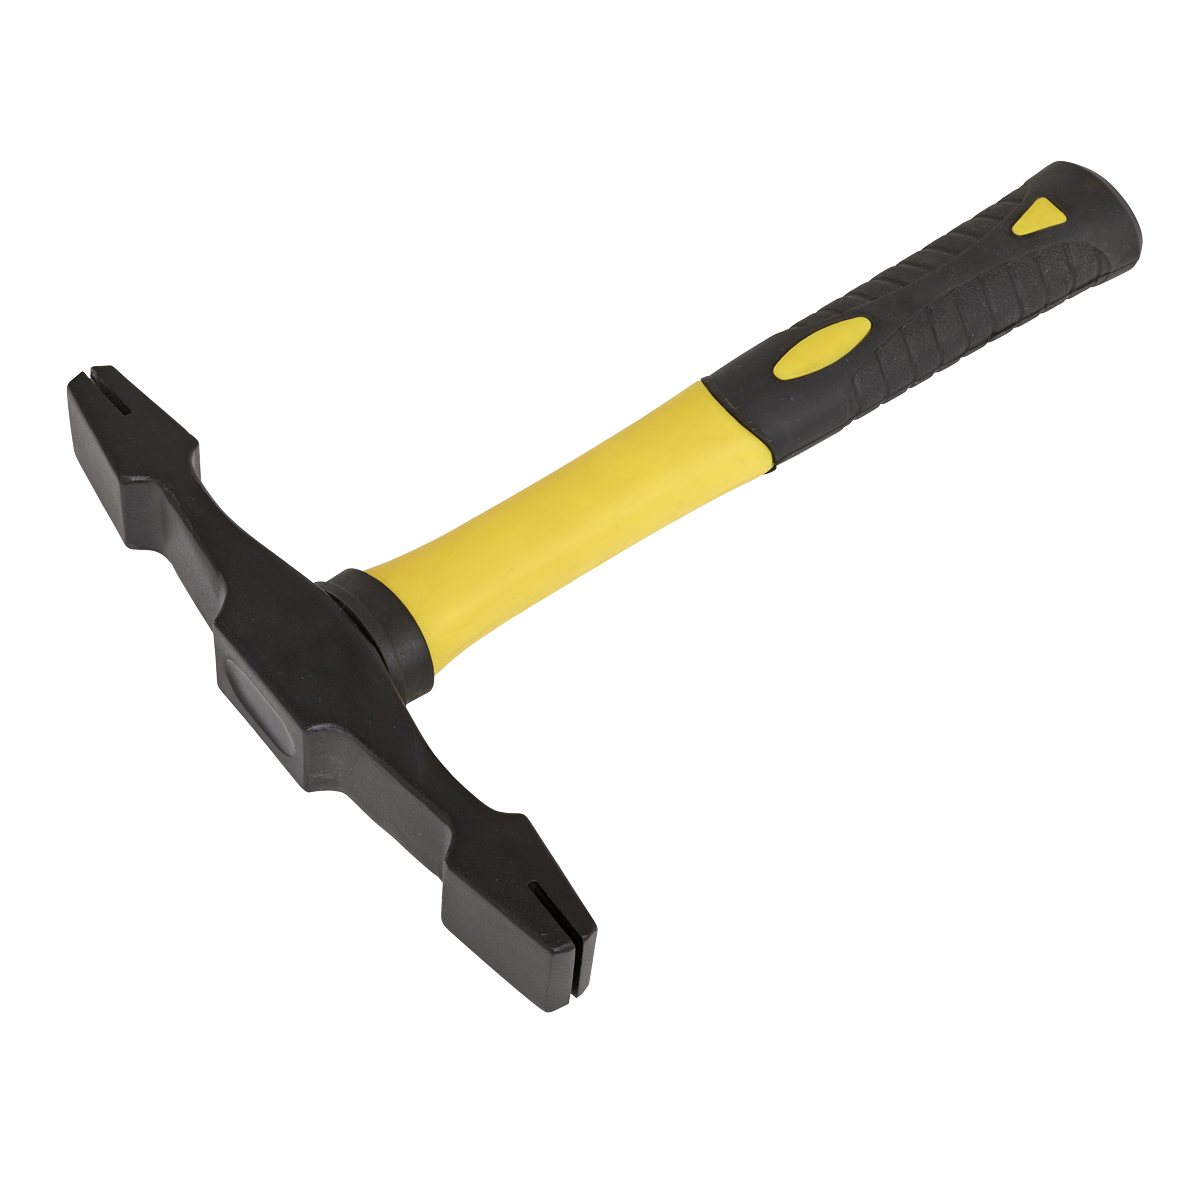 Double Ended Scutch Hammer with Fibreglass Handle - SR707 - Farming Parts